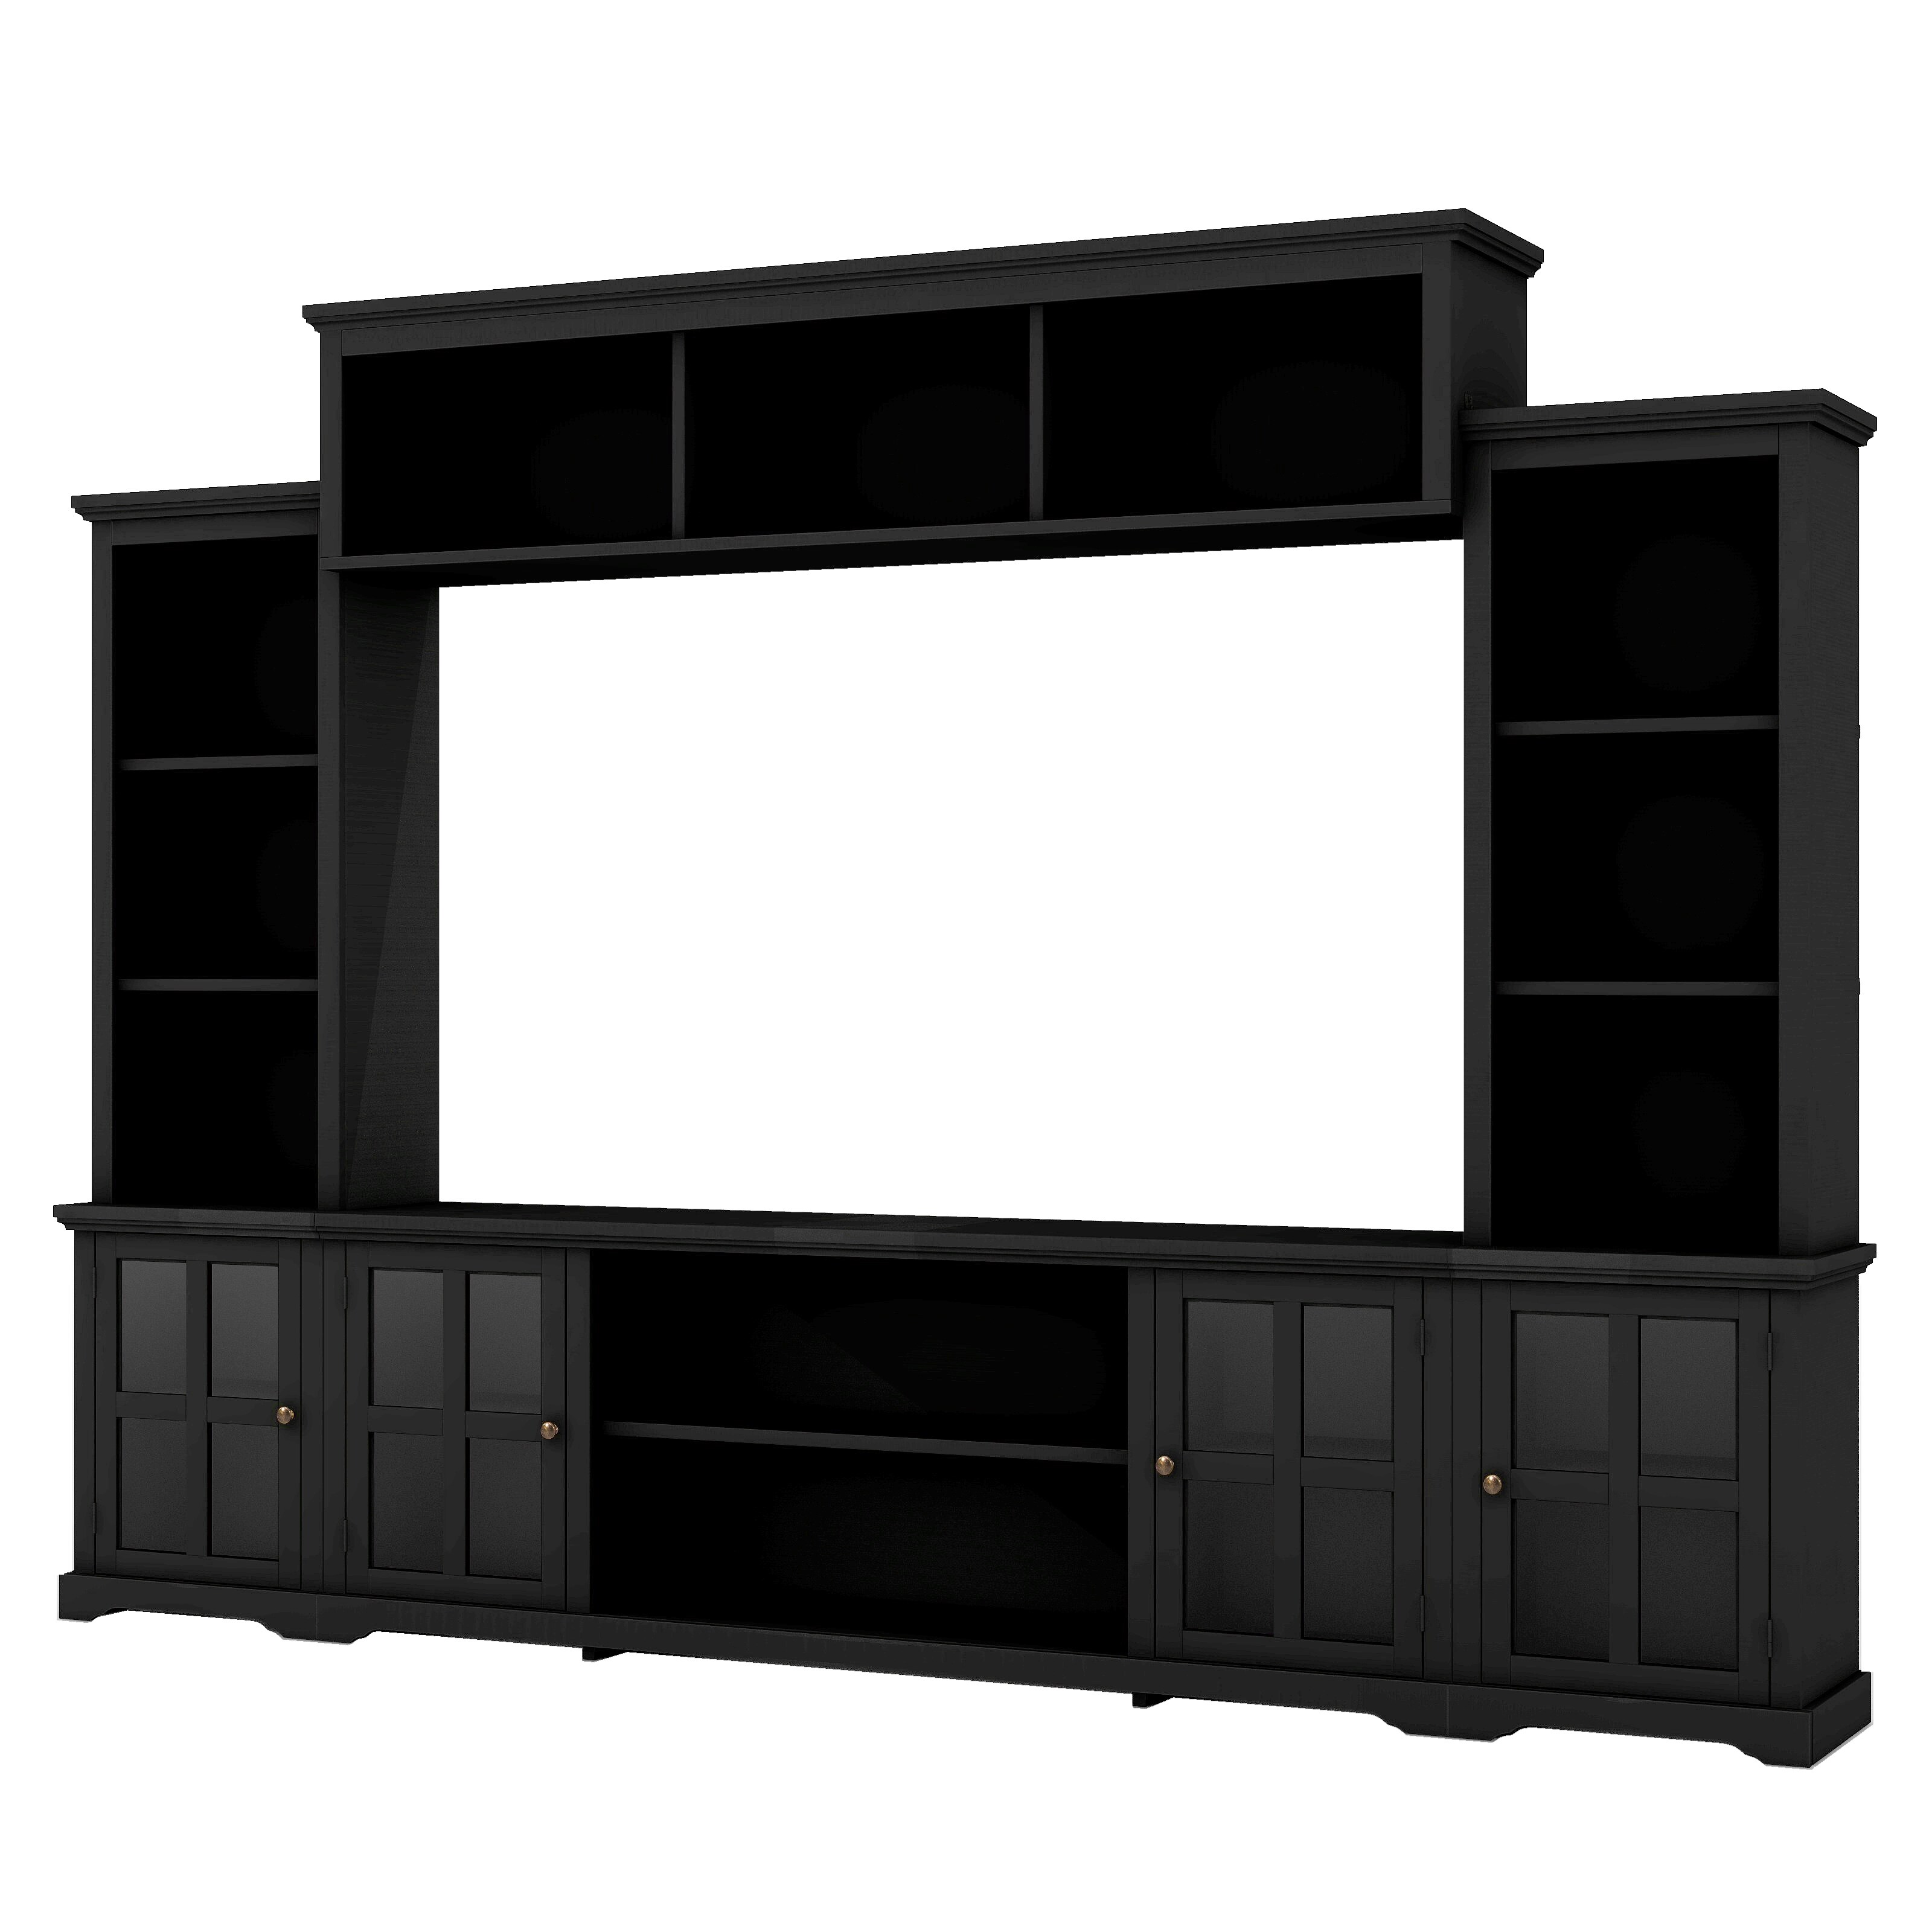 Black Entertainment Wall Unit with Bridge (Up to 70" TVs)